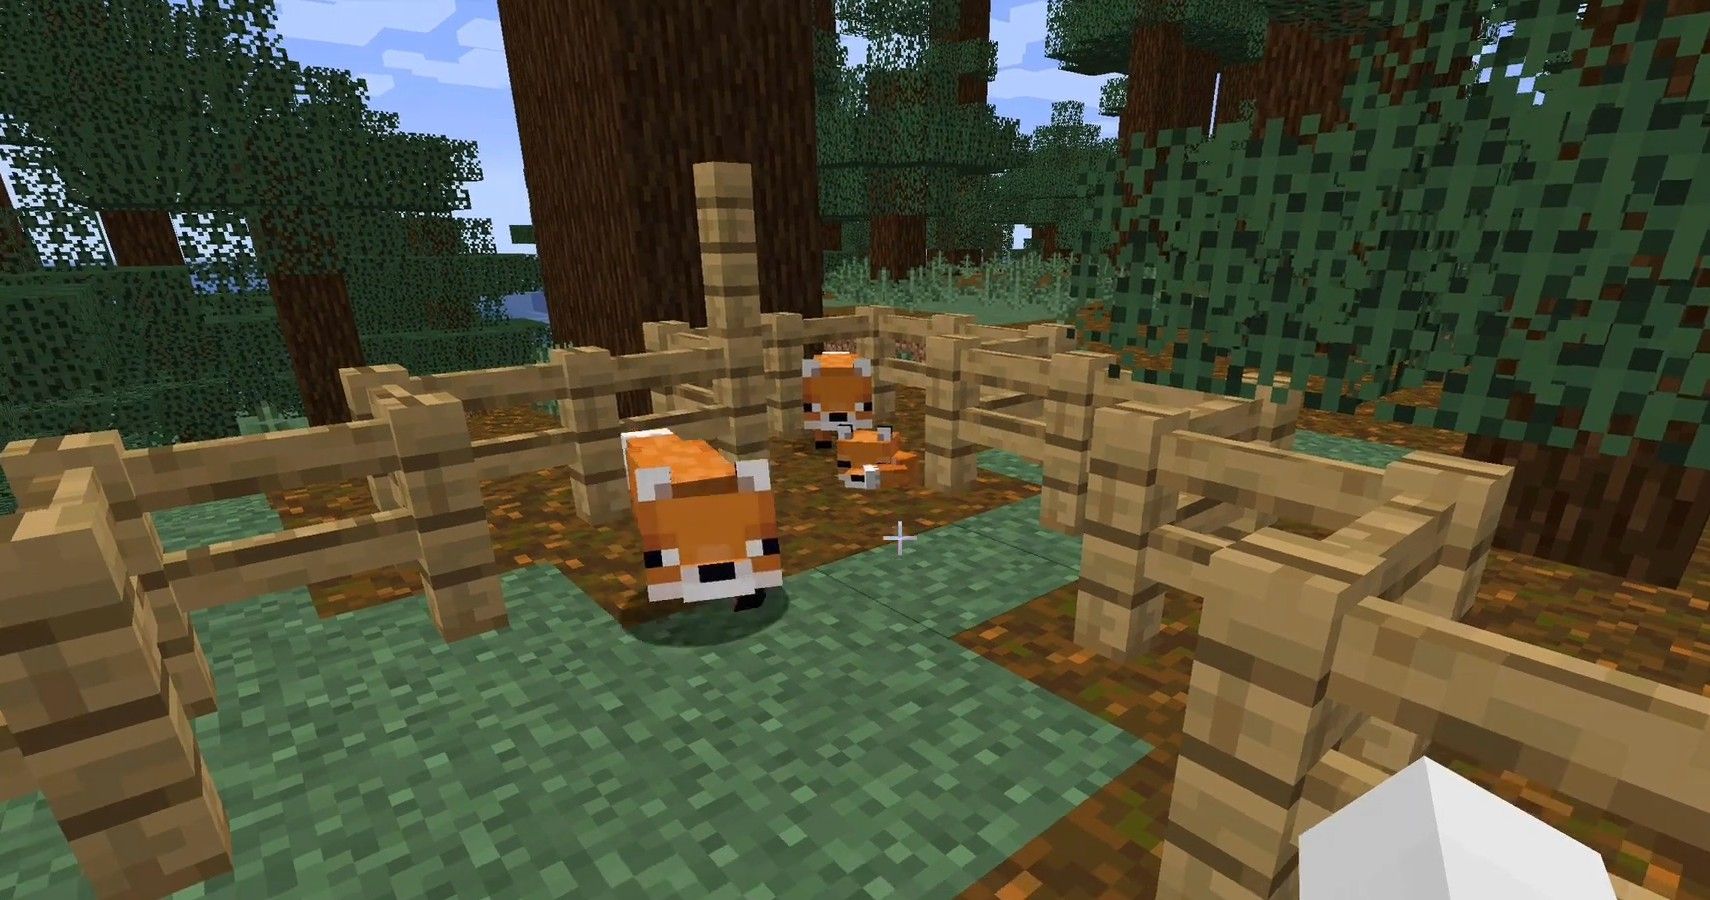 Minecraft: How To Tame Foxes | TheGamer